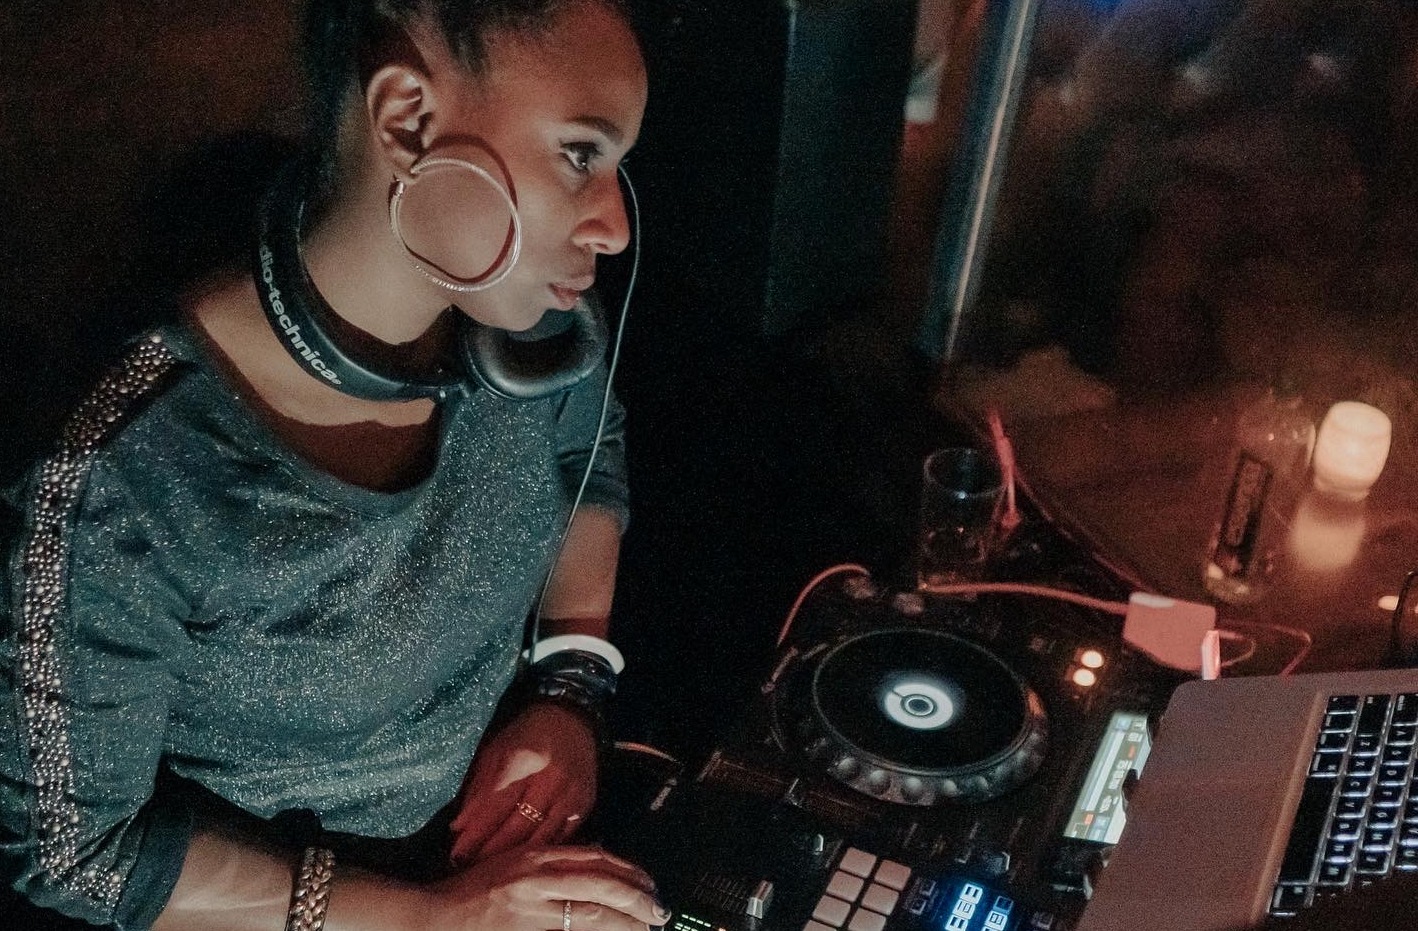 Why Instagram Is No Rec Room (And How DJs Navigate Music Licenses and New Technology)